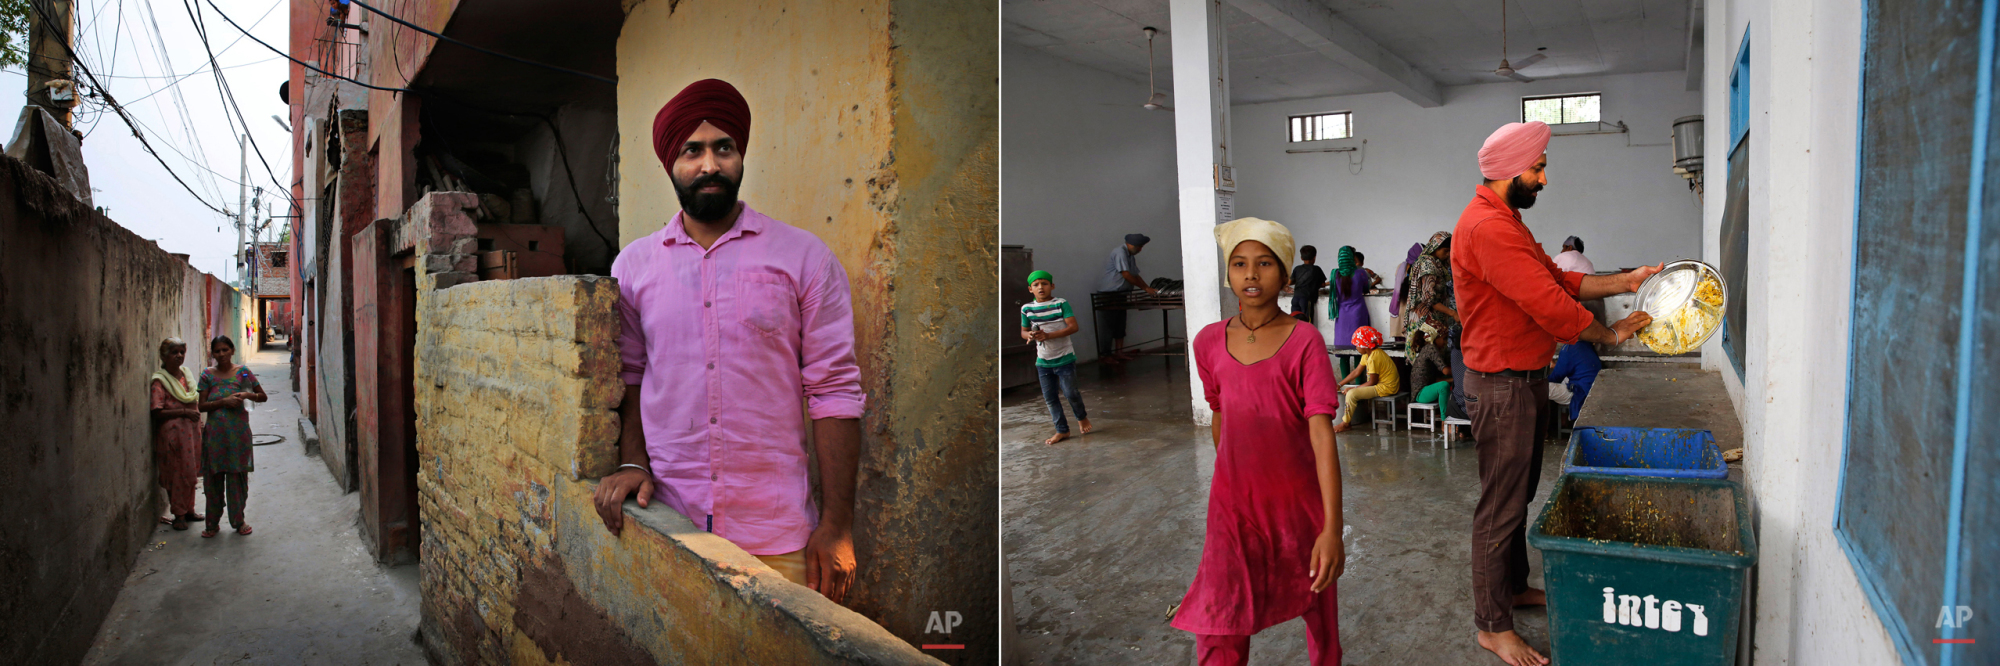  This two picture combo shows on left, Goldy who drives ambulance for Delhi government poses outside his house, in New Delhi, India, on June 15, 2015, as on right, he cleans the used plates during langar at the Majnu-Ka-Tilla Gurdwara or Sikh temple,